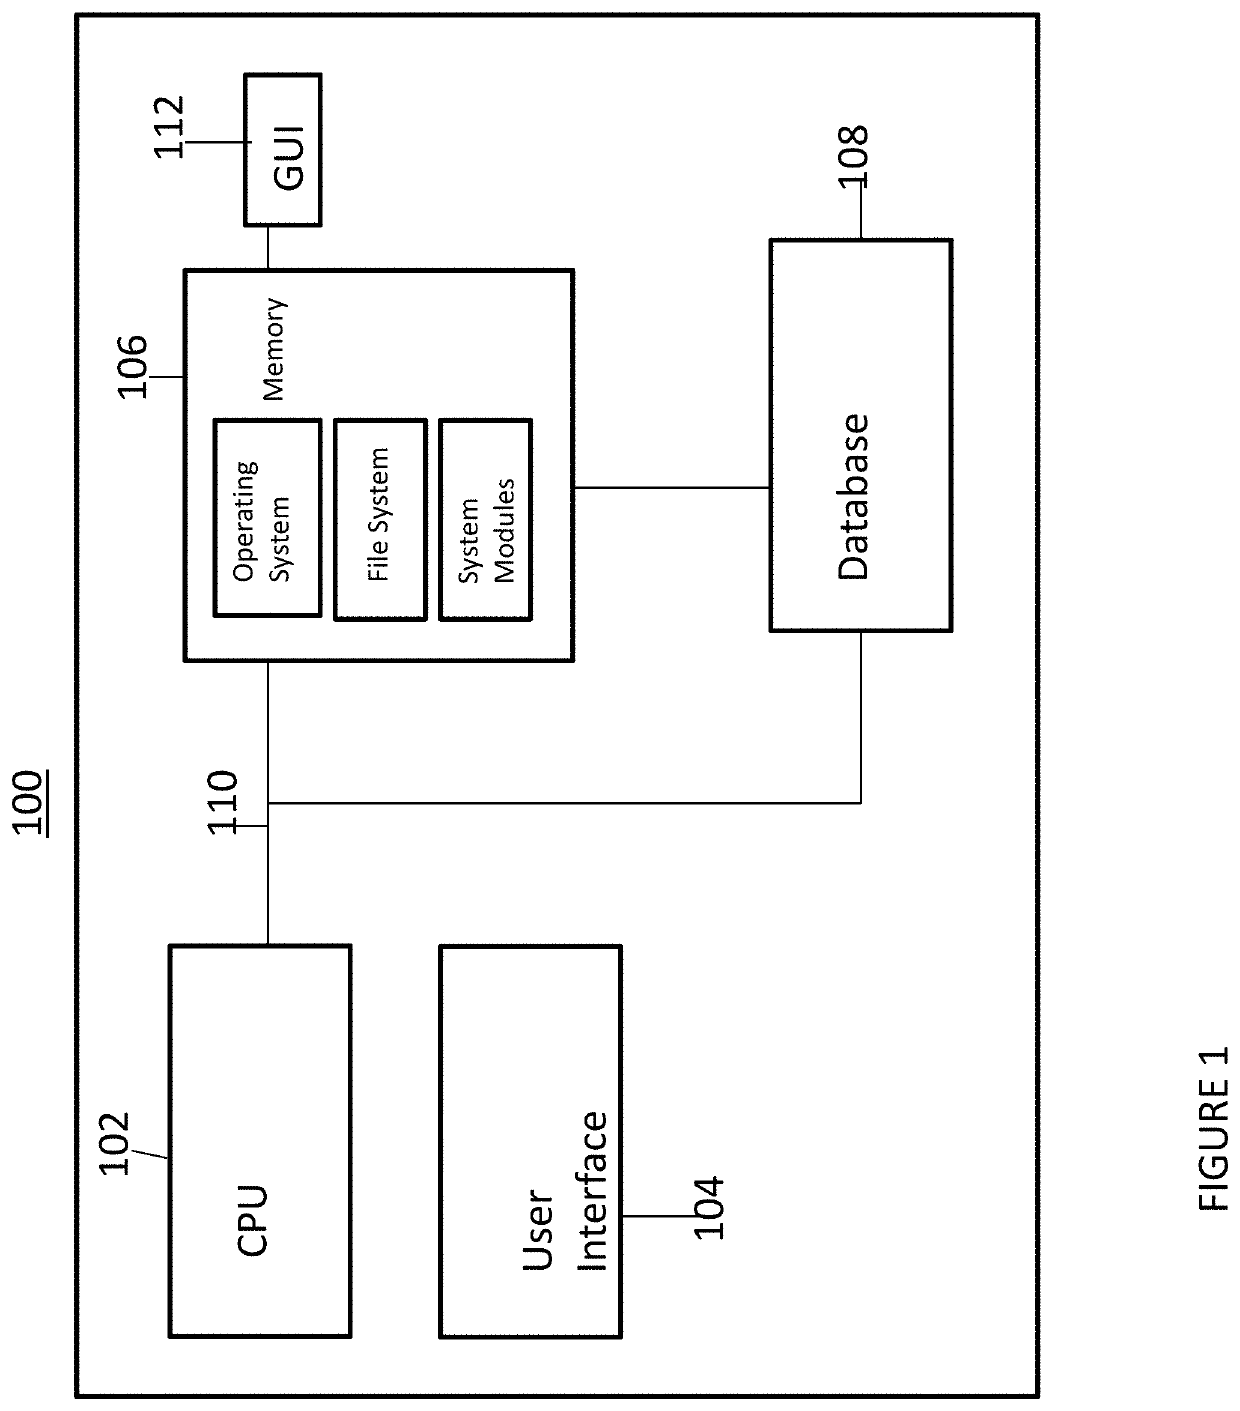 System and method for dossier creation with responsive visualization